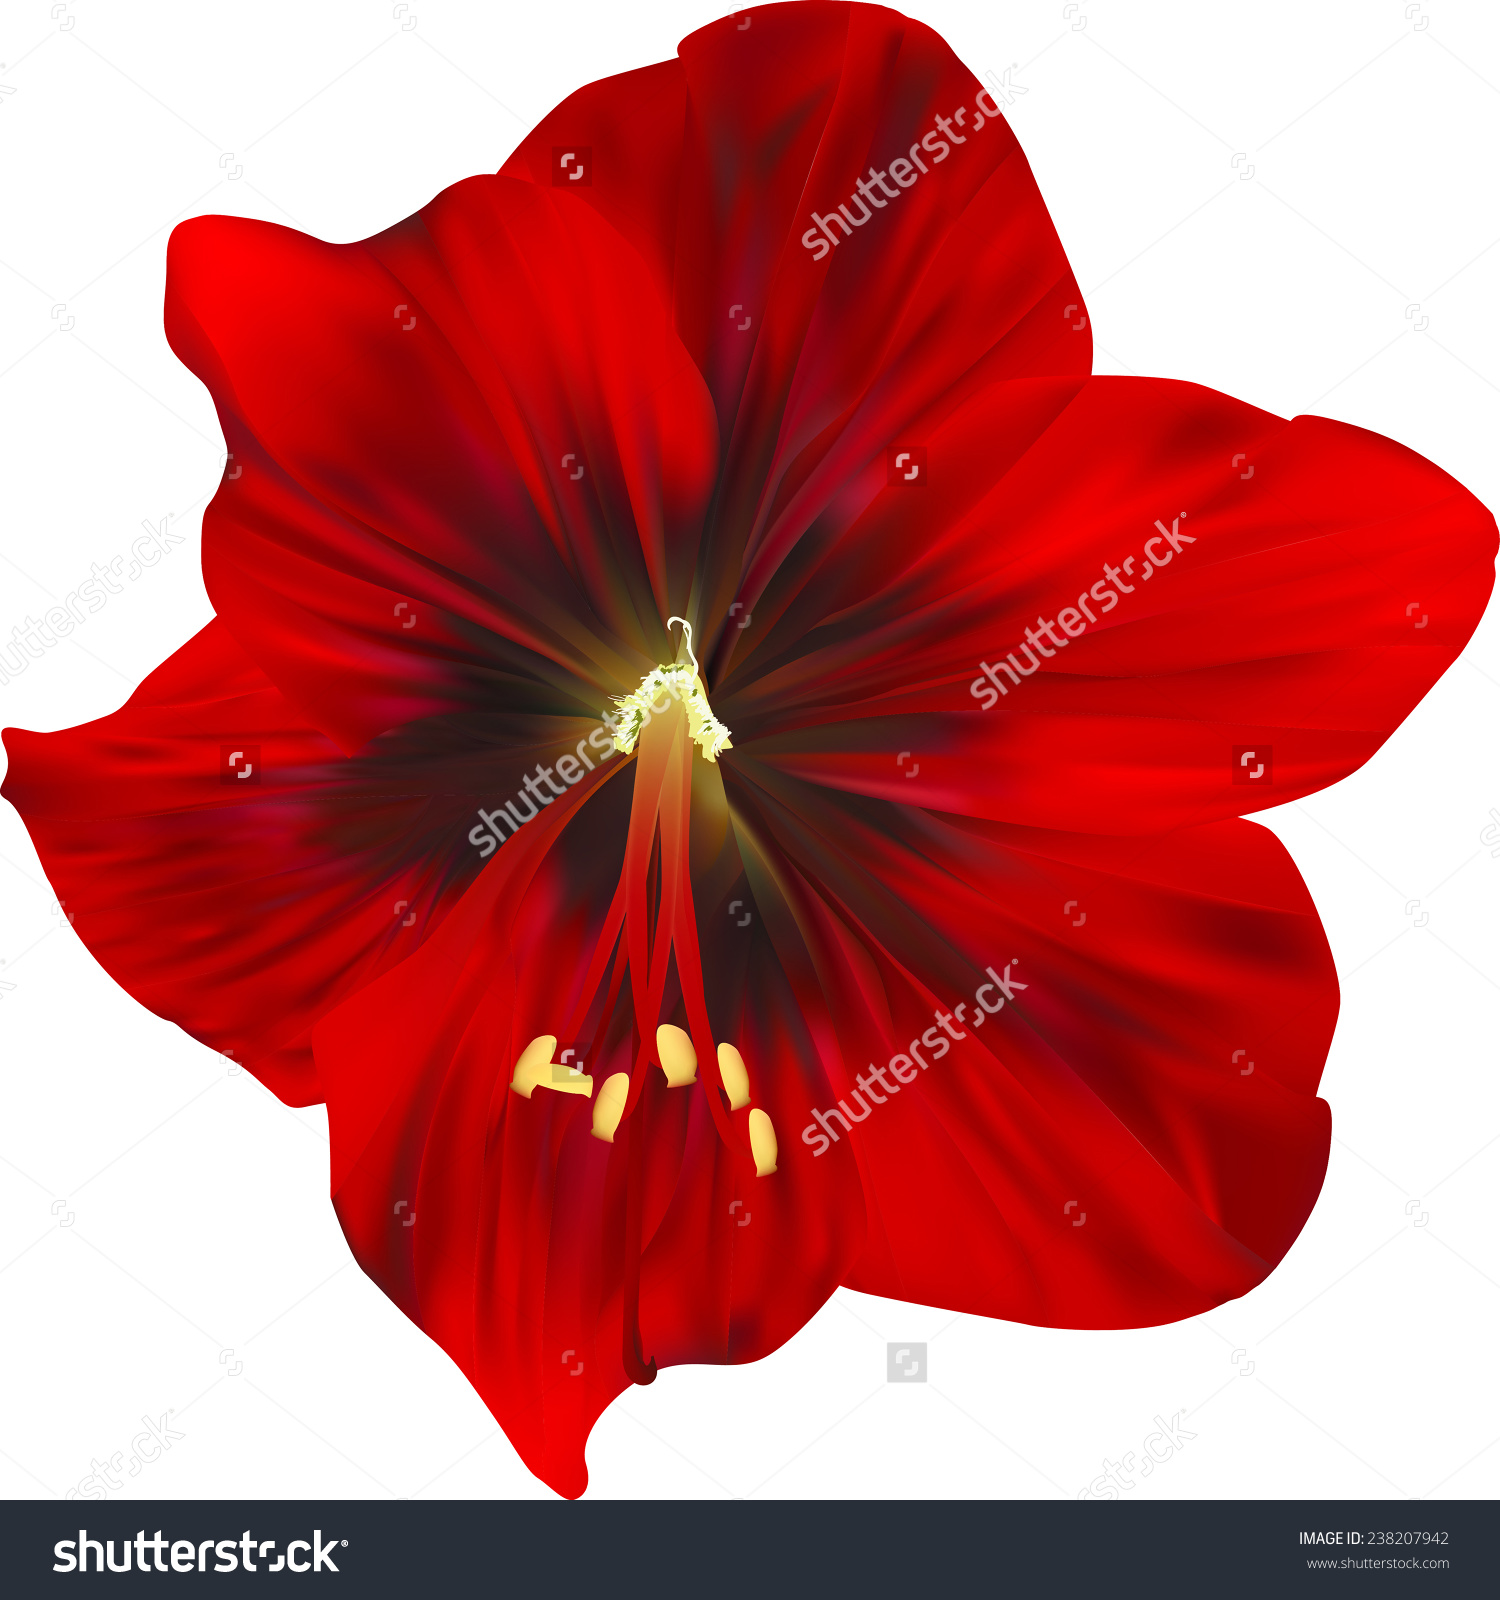 Amaryllis clipart #6, Download drawings